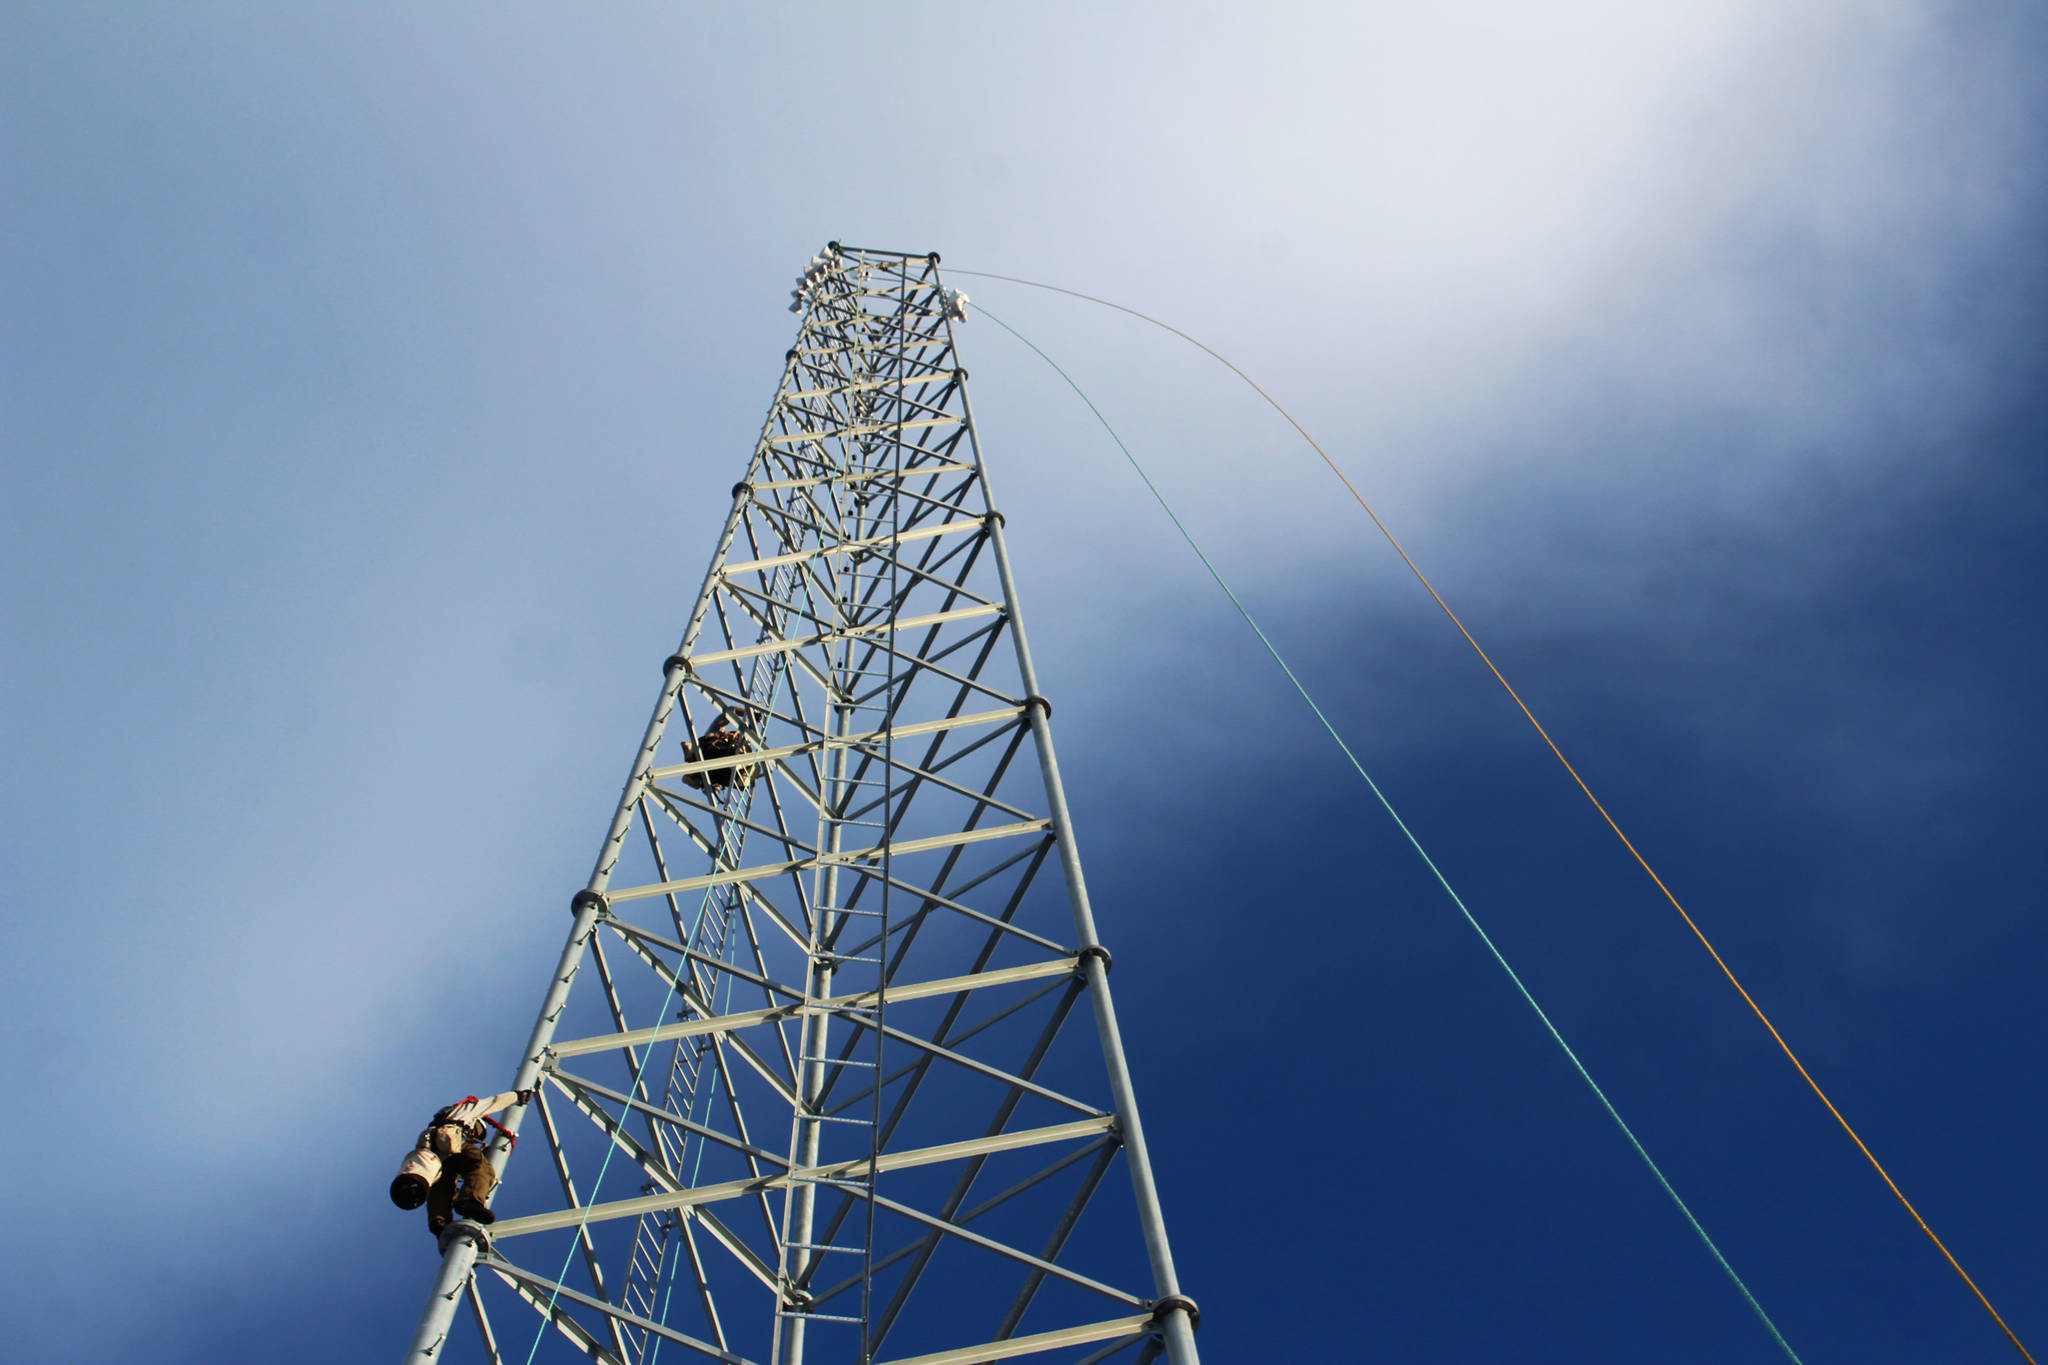 Billy Adamson (left) and Adam Kiffmeyer scale a communications tower on Thursday, Jan. 7 in Nikiski, Alaska. Homer-based SPITwSPOTS was one of the telecommunications companies awarded CARES money by the Kenai Peninsula Borough as part of an effort to increase public access to the internet. (Ashlyn O’Hara/Peninsula Clarion)